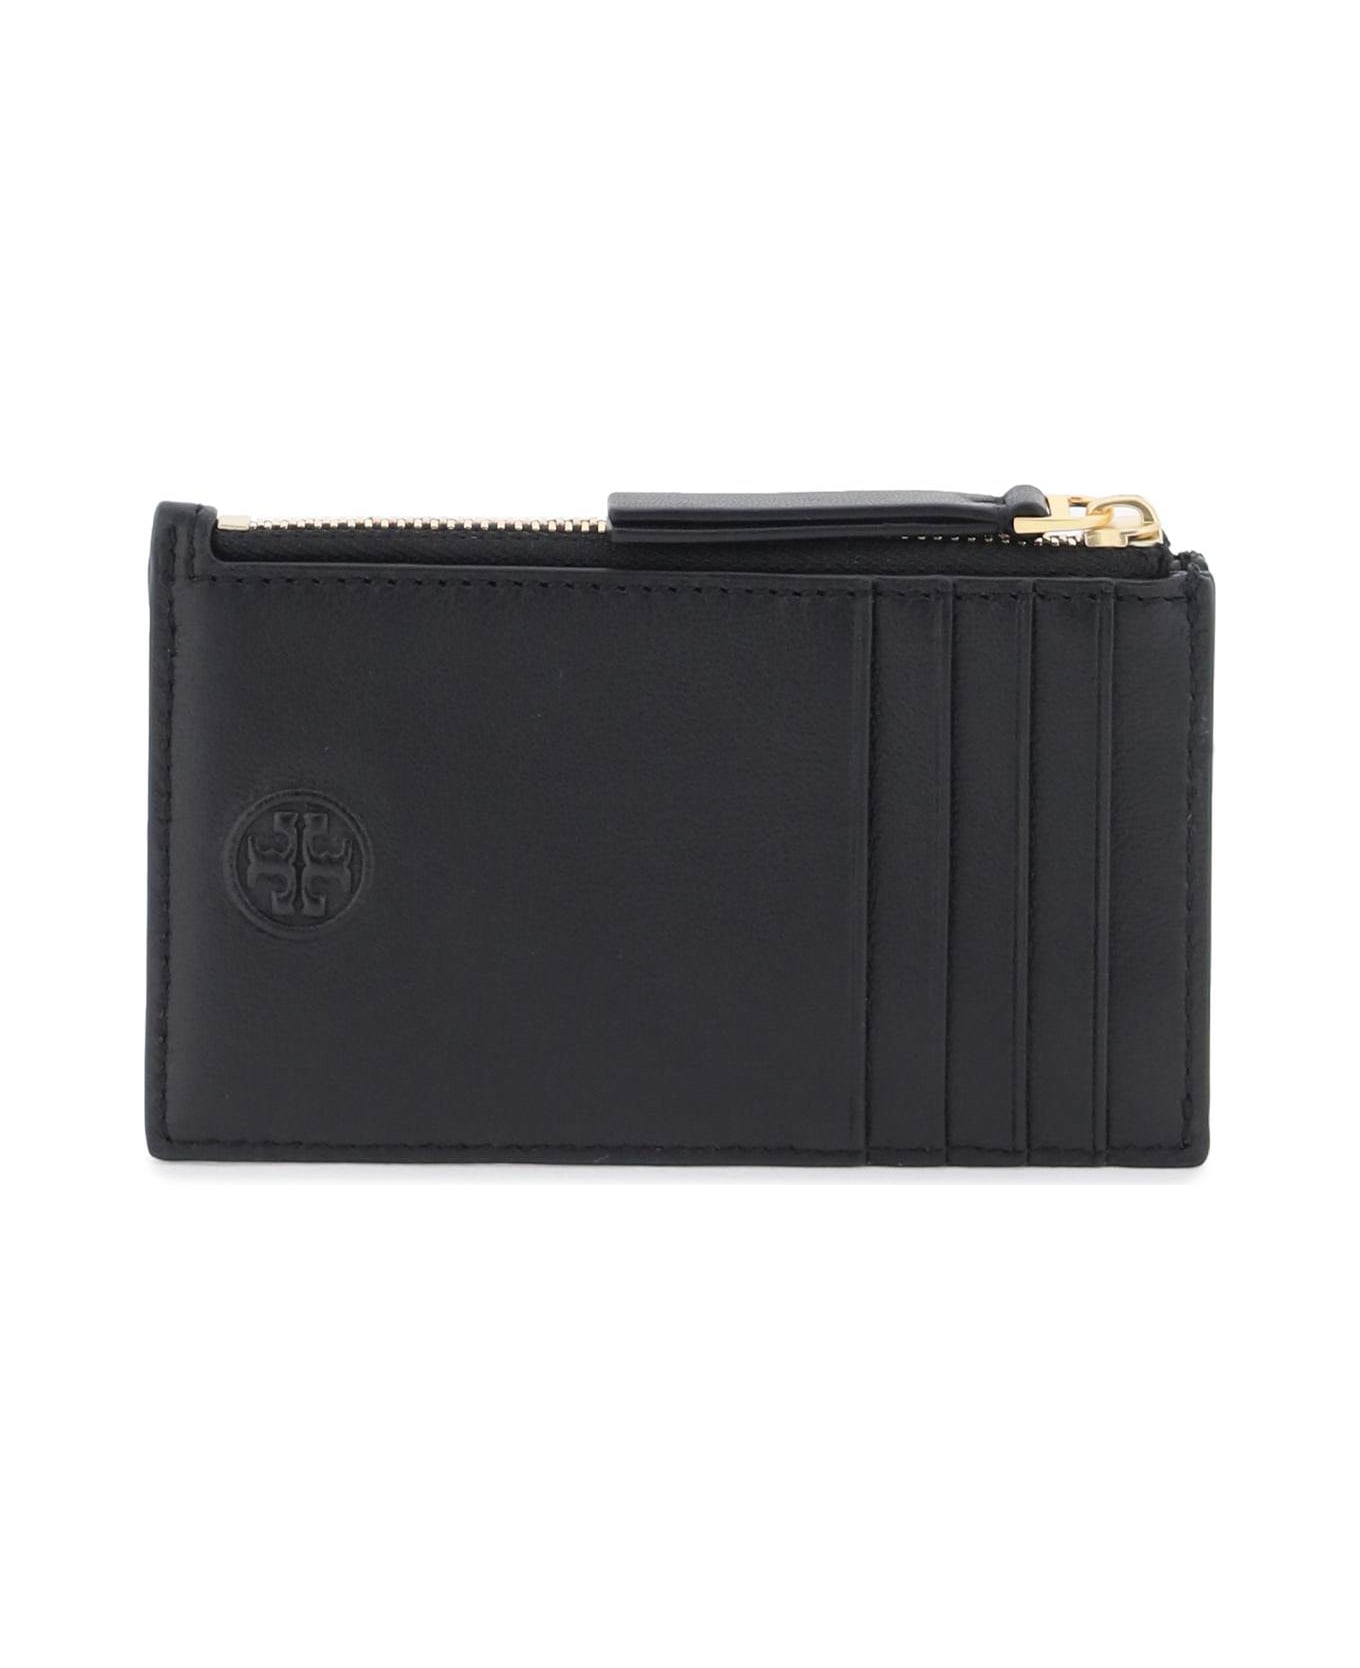 Tory Burch Smooth Leather Card Holder - Black 財布